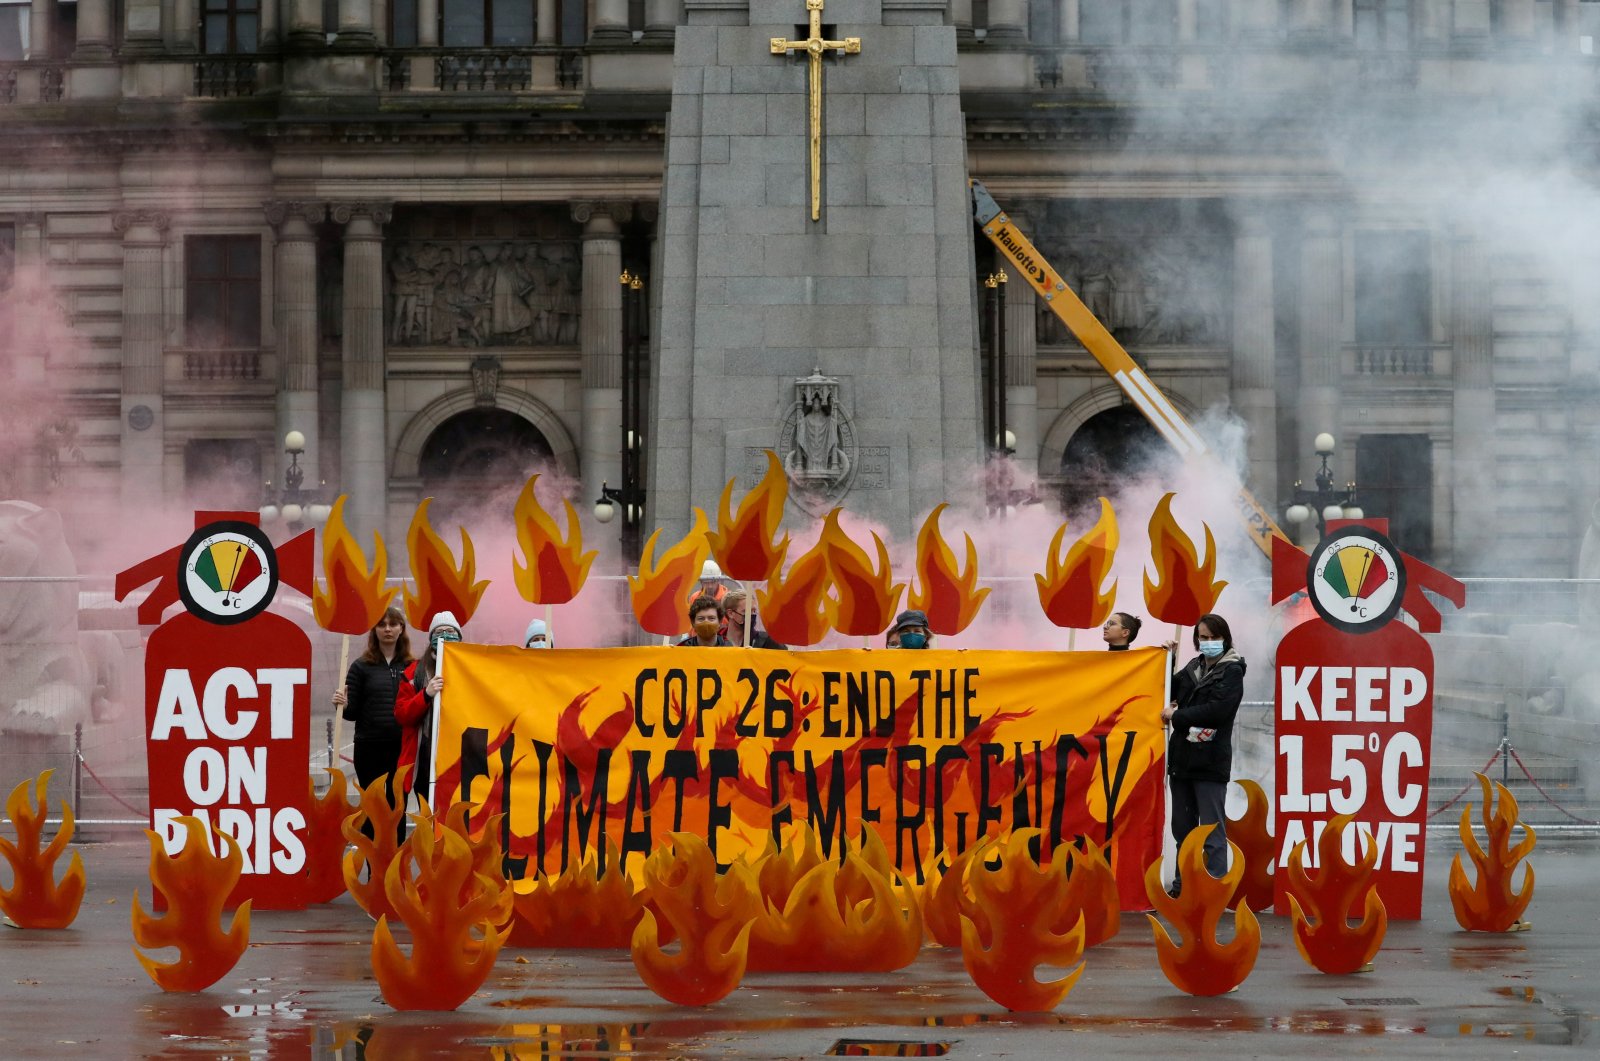 Activists symbolically set George Square on fire with an art installation of faux flames and smoke ahead of the U.N. climate change conference (COP26), in Glasgow, Scotland, Oct. 28, 2021. (Reuters Photo)